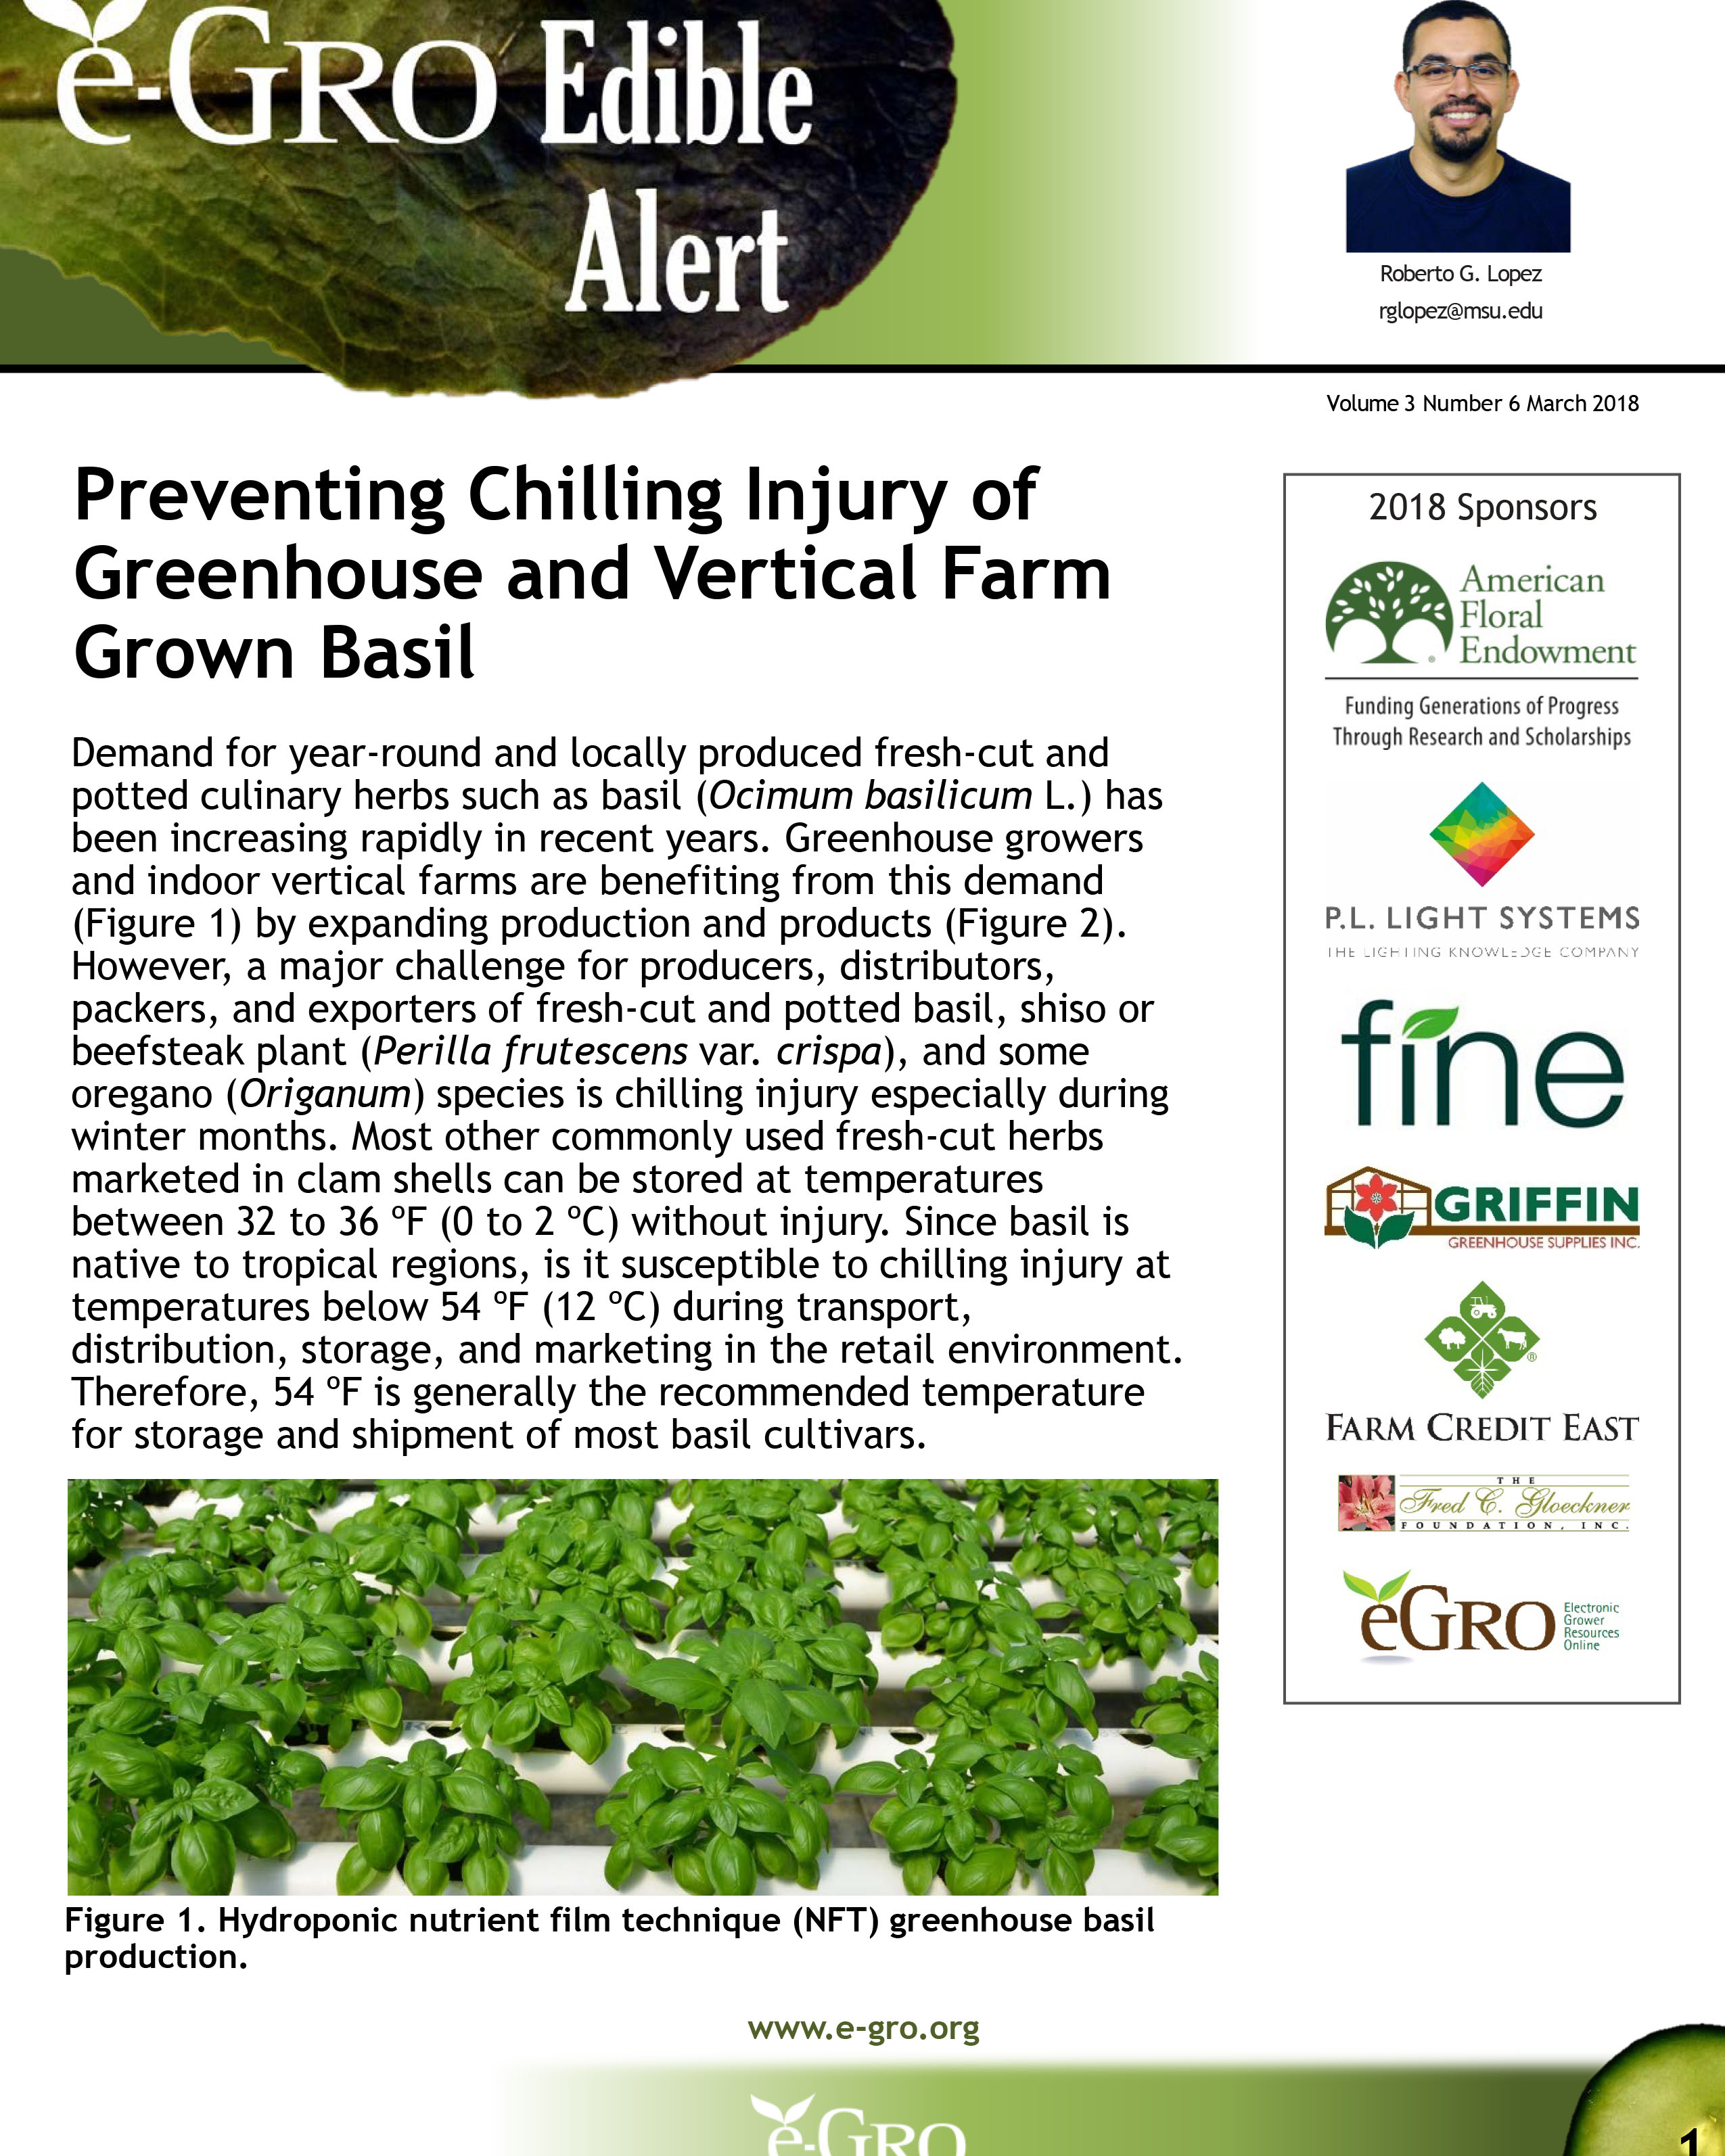 An example of MSU generated e-GRO Edible Alerts.